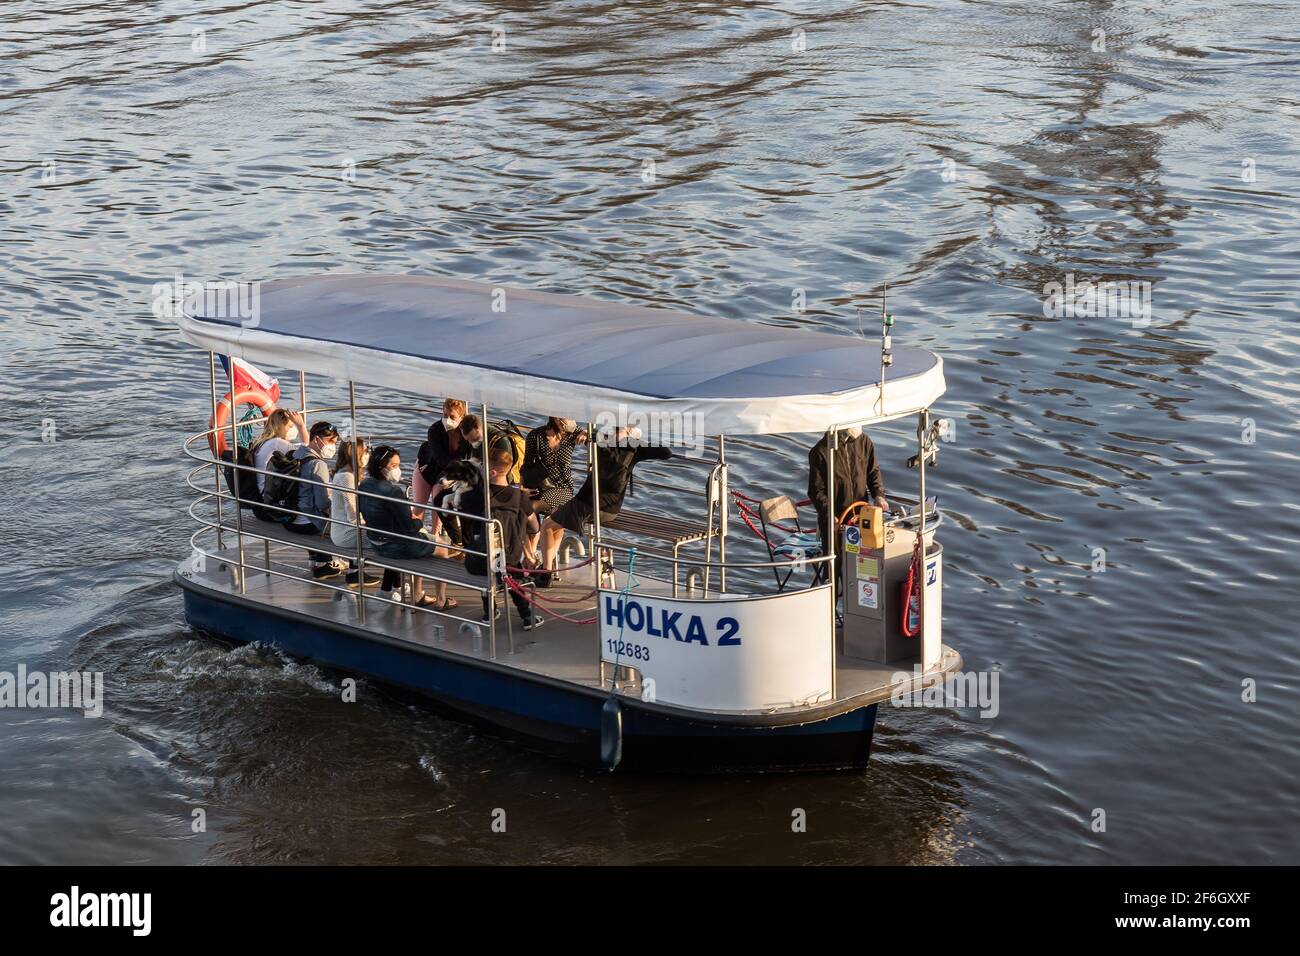 PRAGUE - March 31: Ferry Holka 2 transports passengers from district Karlin  to district Holesovice on March 31, 2021 on Vltava river, Czech Republic  Stock Photo - Alamy